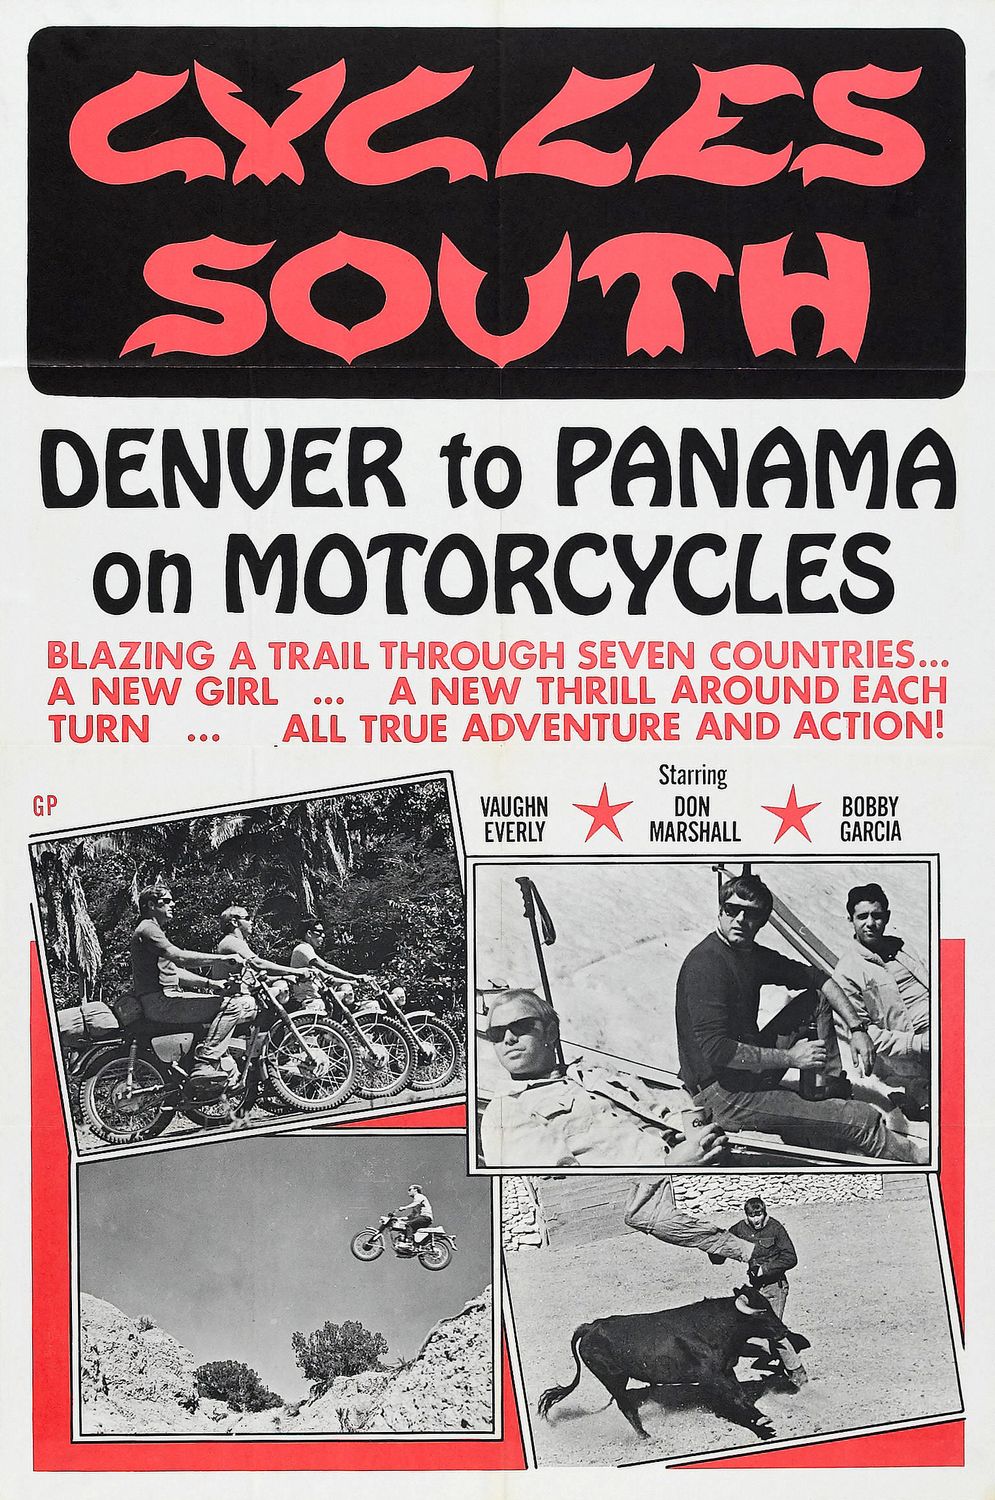 Extra Large Movie Poster Image for Cycles South 